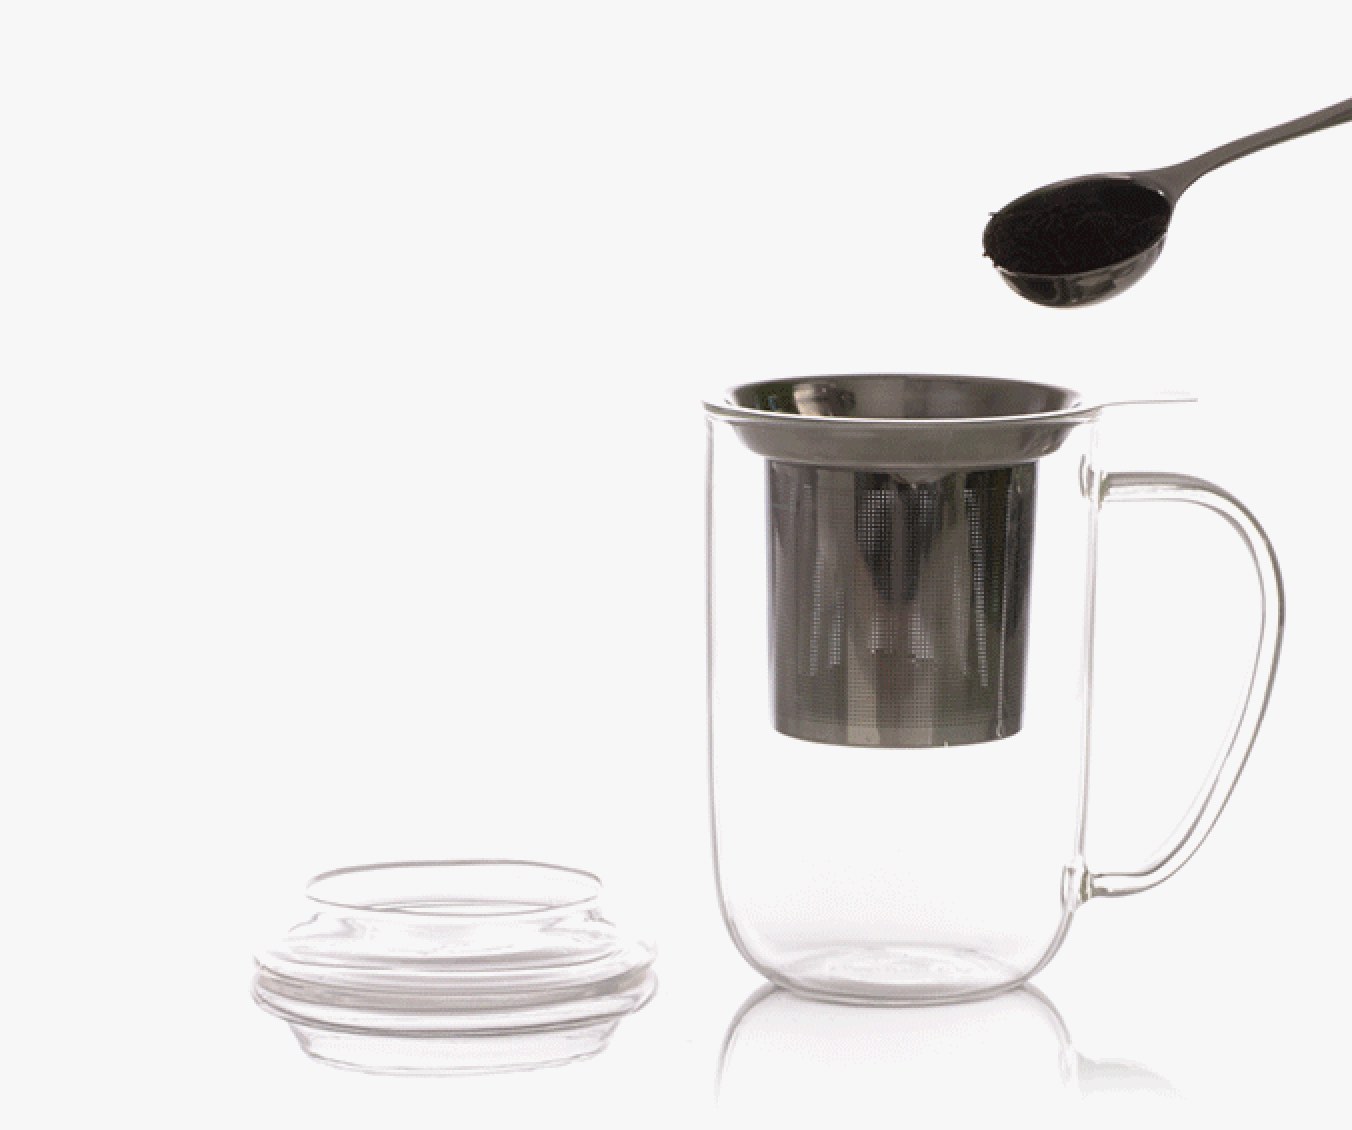 Spoon adding loose leaf tea to stainless steel tea infuser in empty clear 16 oz glass mug.